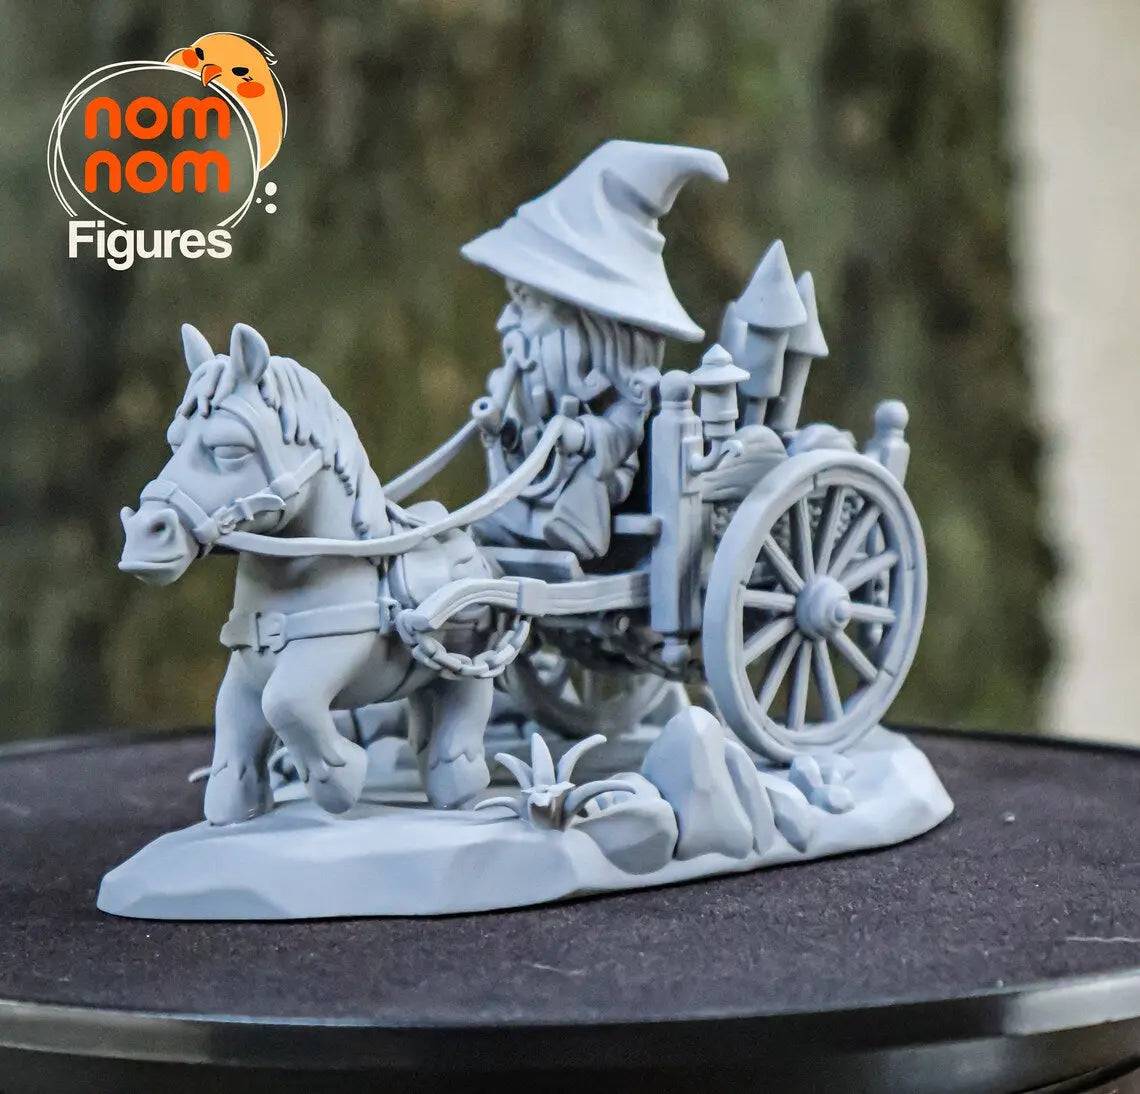 Chibi Wizard Who Arrived Precisely When He Meant To | Resin Garage Kit Sculpture Anime Video Game Fan Art Statue | Nomnom Figures - Tattles Told 3D